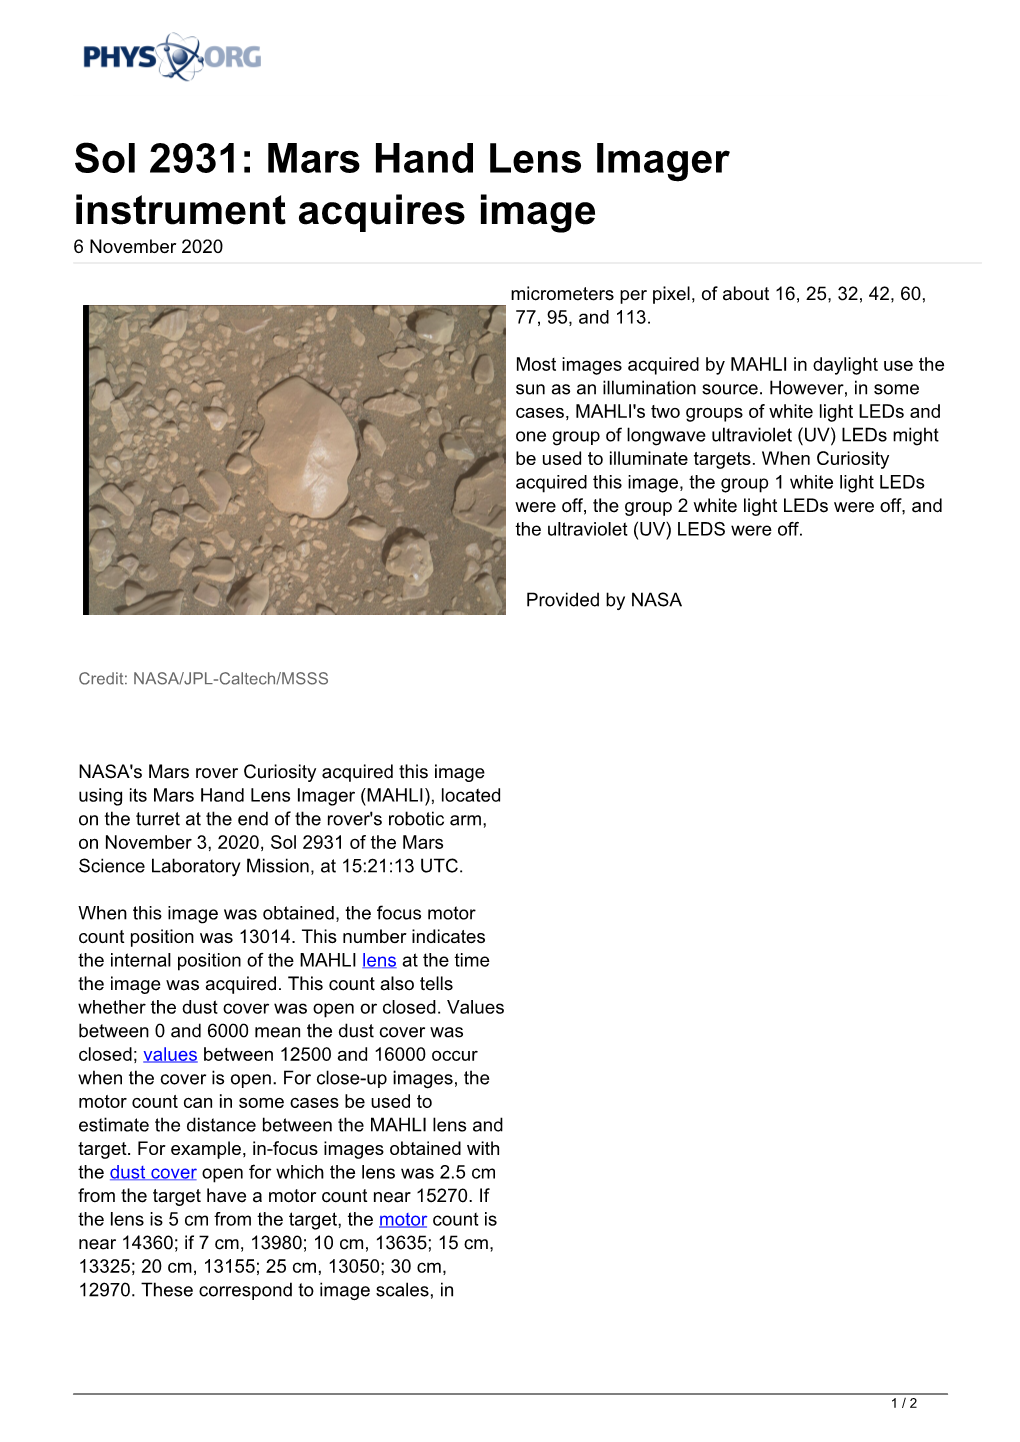 Mars Hand Lens Imager Instrument Acquires Image 6 November 2020